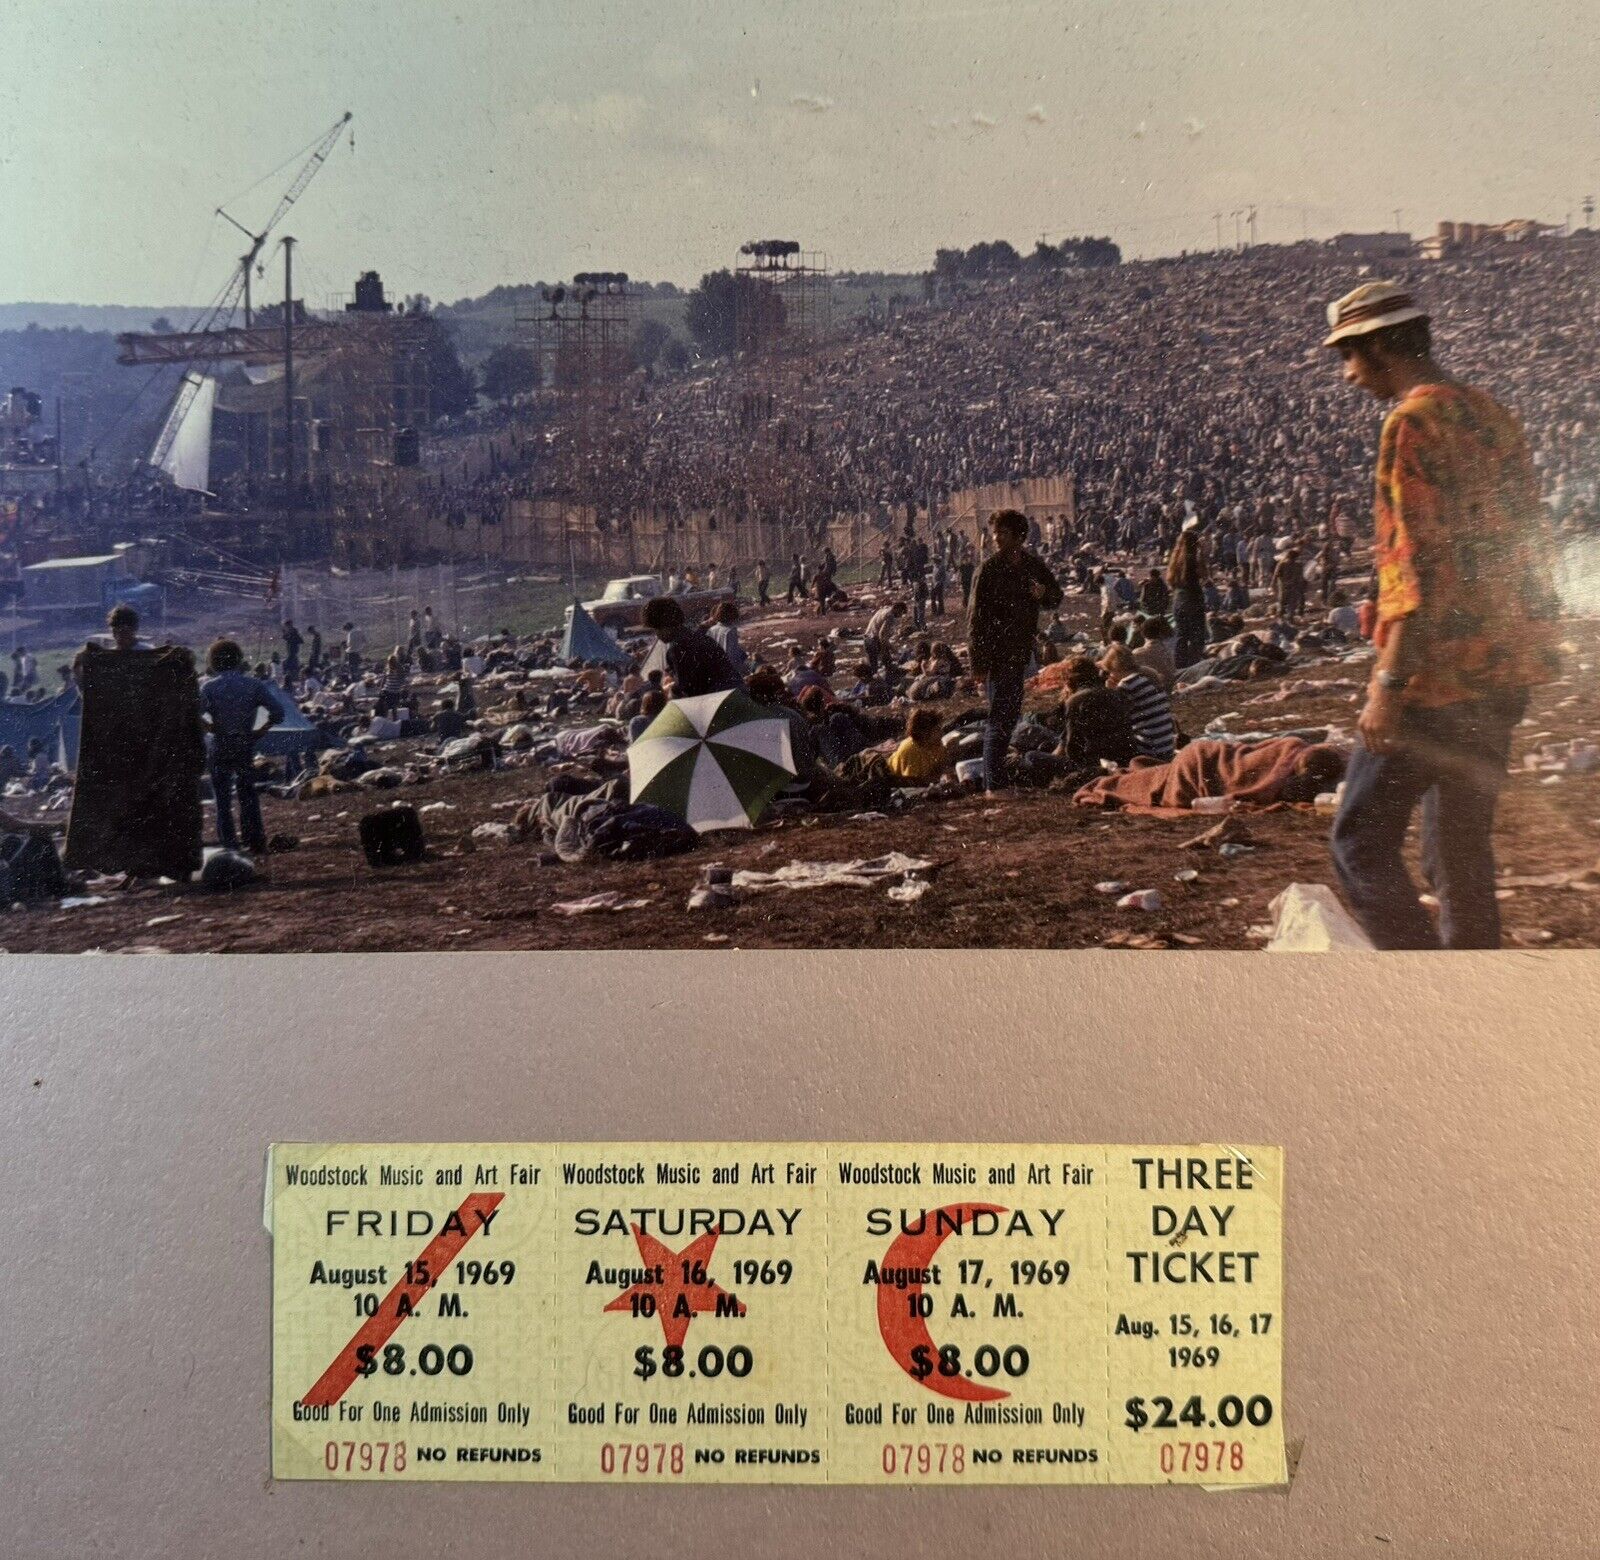 WOODSTOCK (ORIGINAL VINTAGE 3 Day 1969 TICKET) & ICON CROWD PHOTO In Frame.